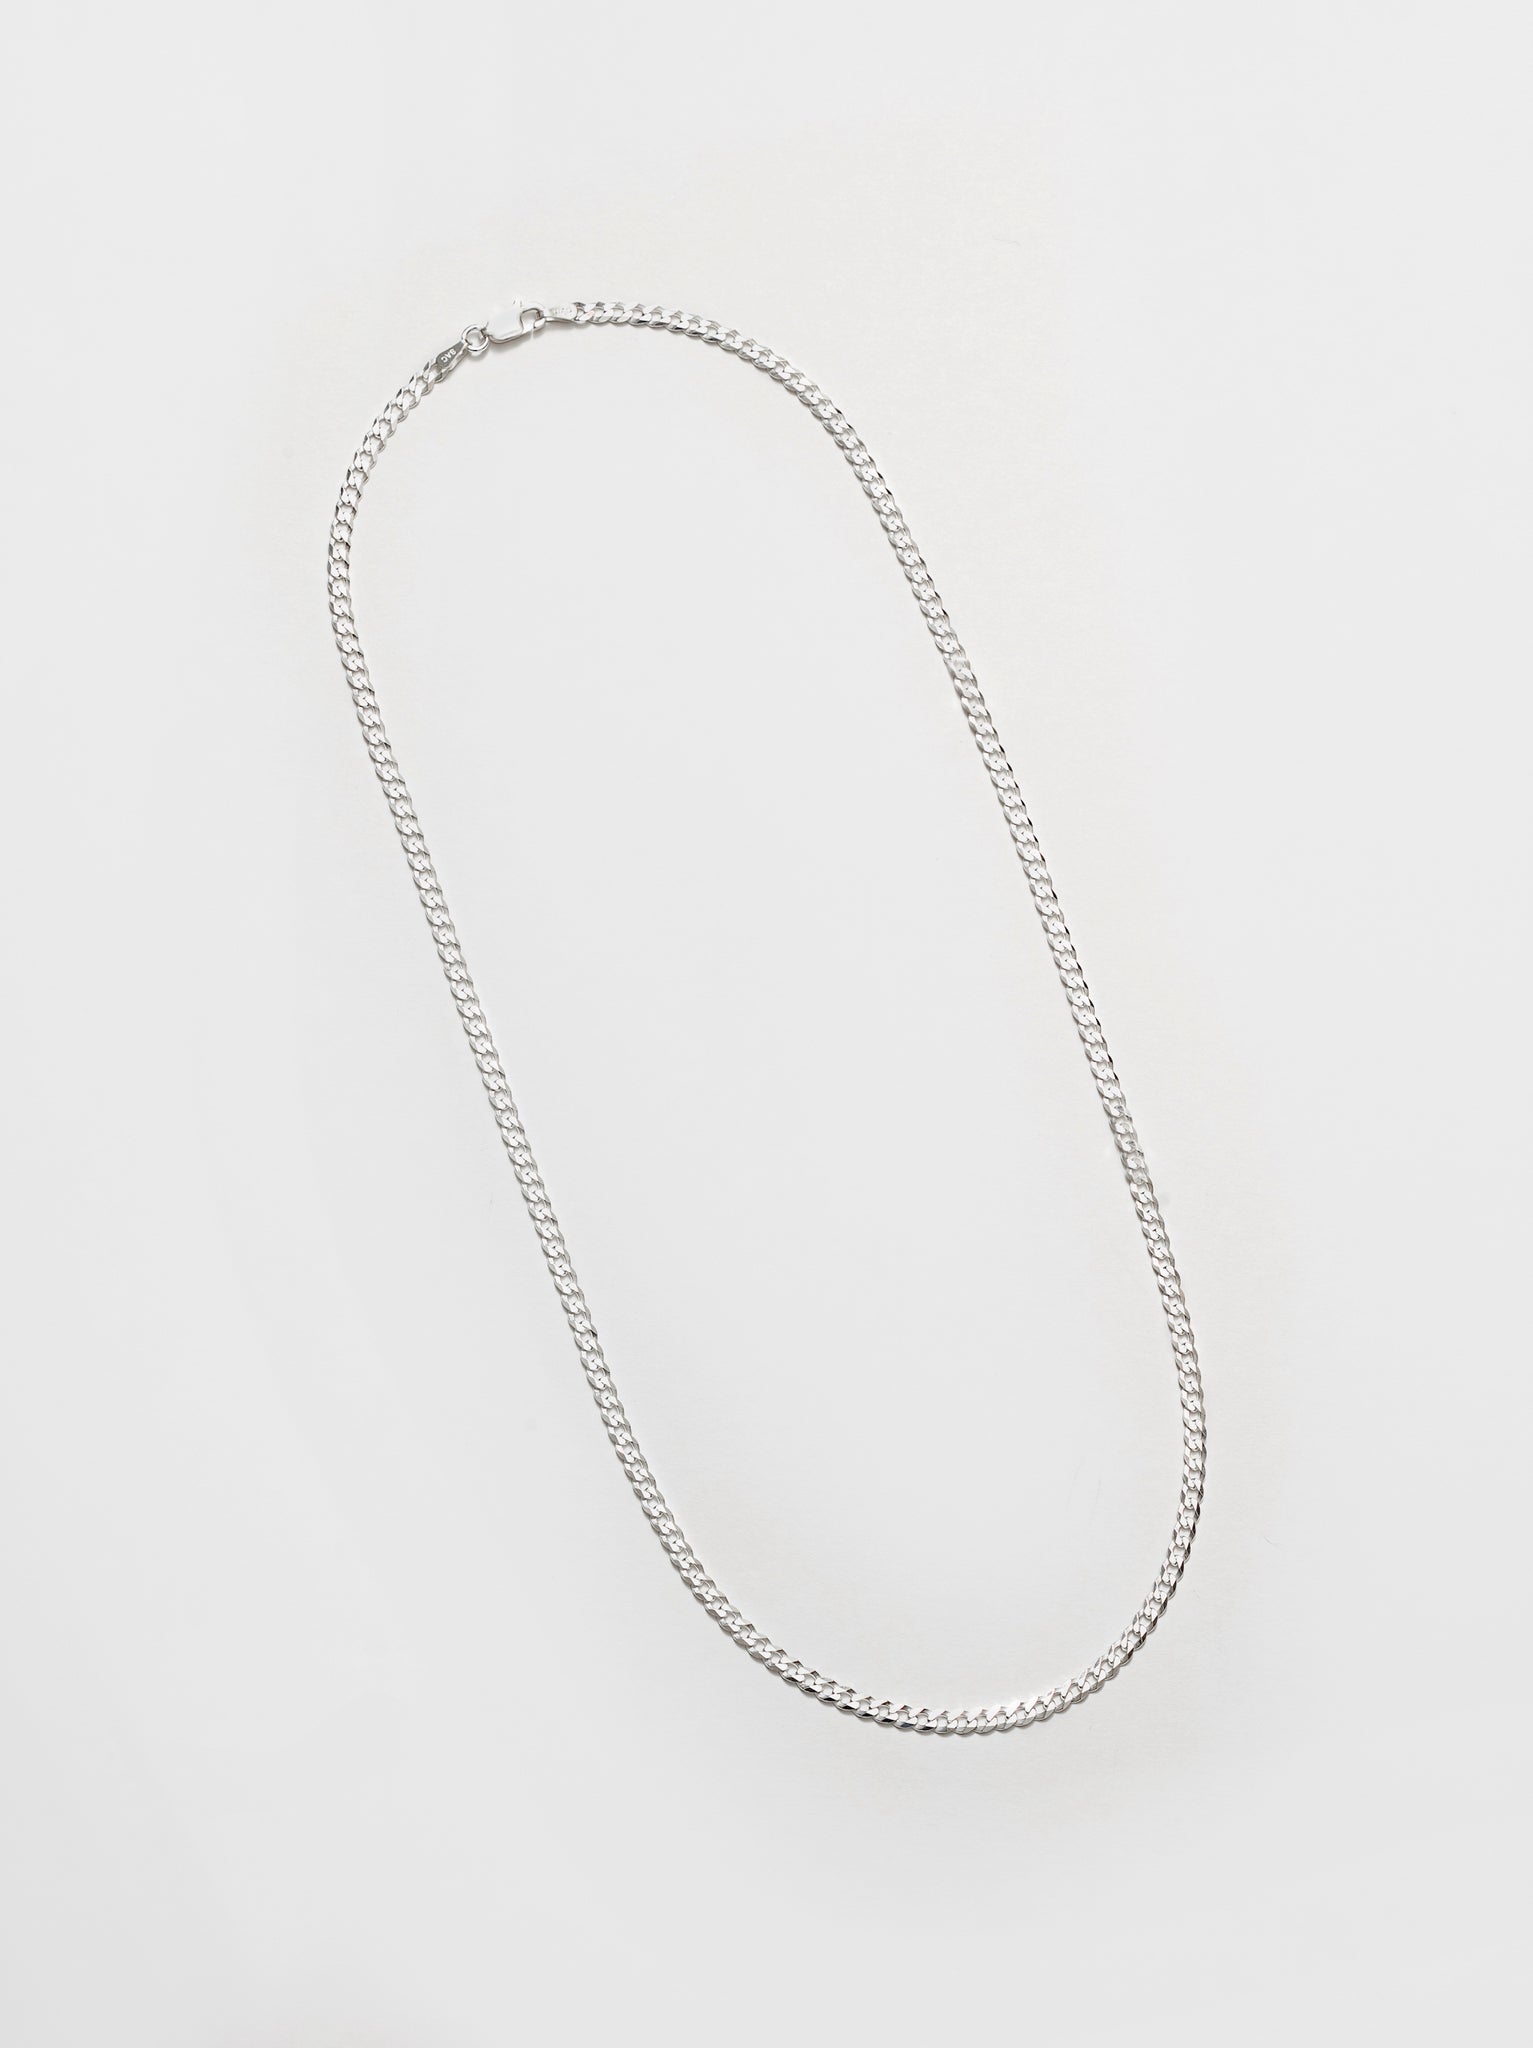 Wolf Circus Curb Chain Necklace Sterling Silver Diamond Cut | Liam Necklace in Sterling Silver-Necklaces-wolfcircus.com